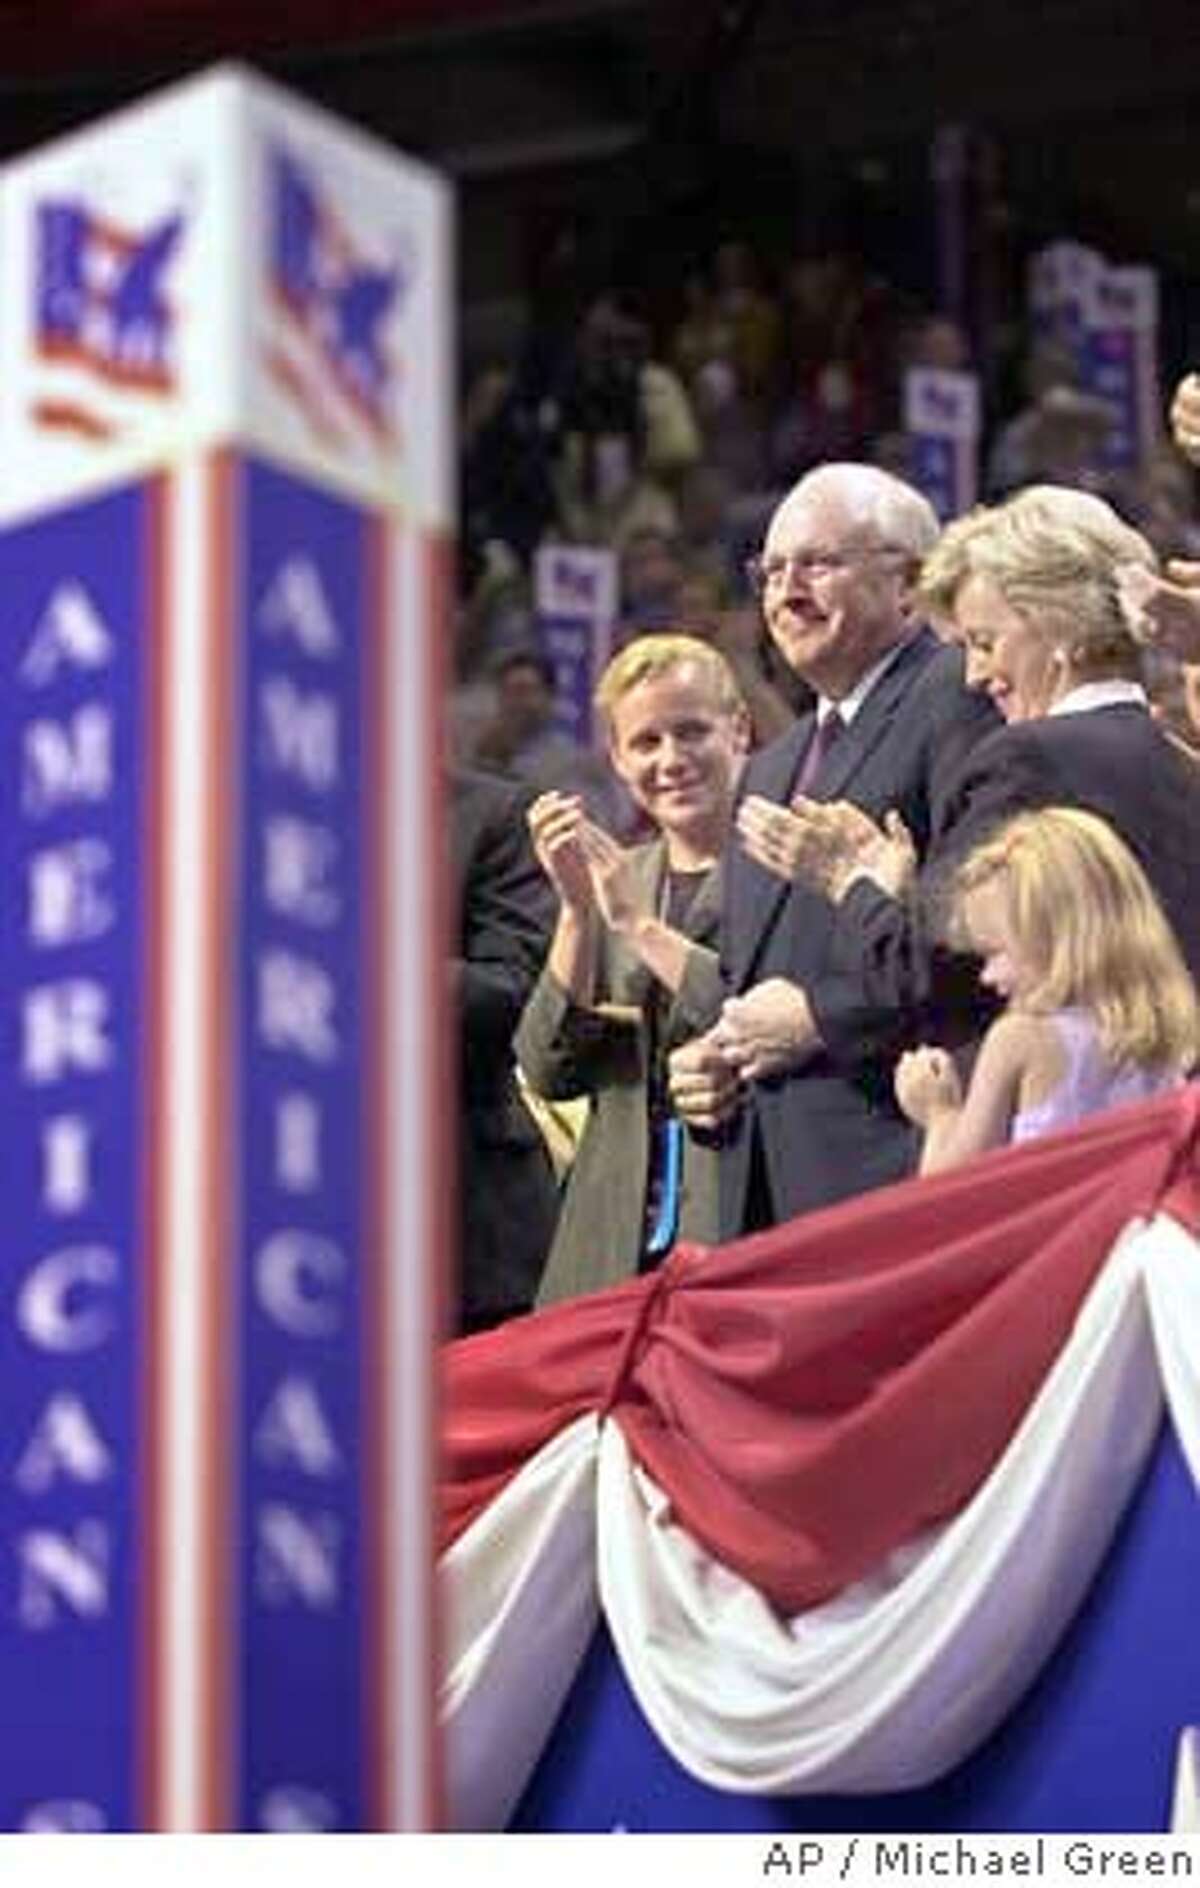 Dick Cheney, the choice of George W. Bush for vice-presidential nominee, attends the Republican National Convention with his family in Philadelphia Monday evening, July 31, 2000. Cheney's daughter, Mary, is at left, wife Lynne at right, and granddaughter at right. (AP Photo/Michael Green) CAT